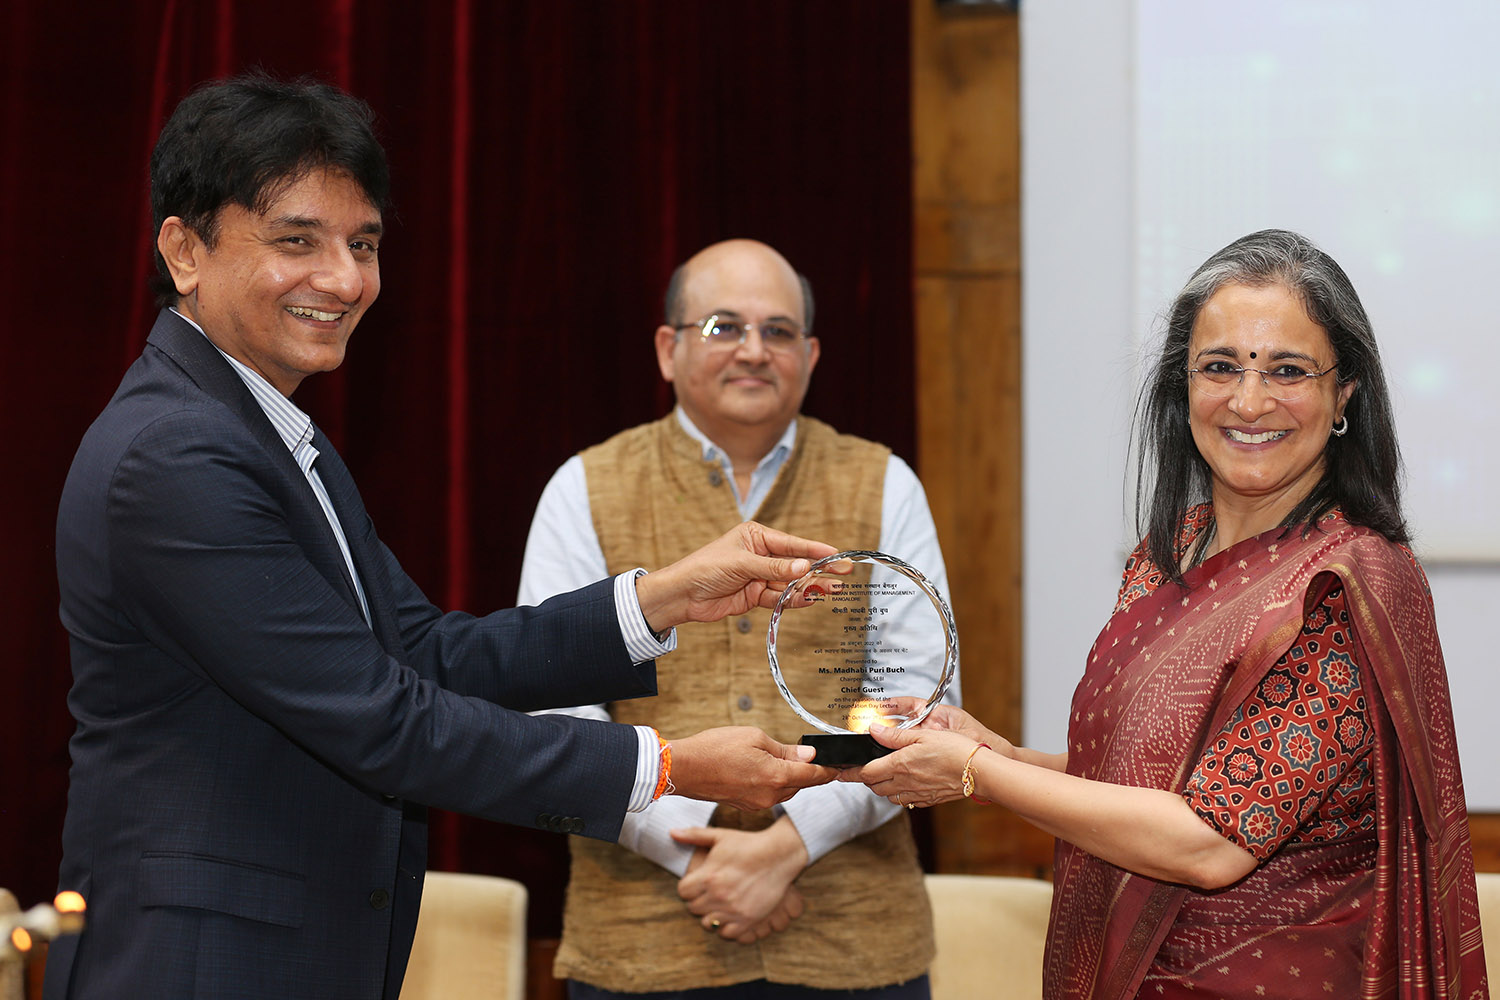 Mr M. D. Ranganath, Member of the Board of Governors, IIMB, and IIMB Director Professor Rishikesha T Krishnan thank chief guest Ms Madhabi Puri-Buch for delivering the 49th Foundation Day lecture.